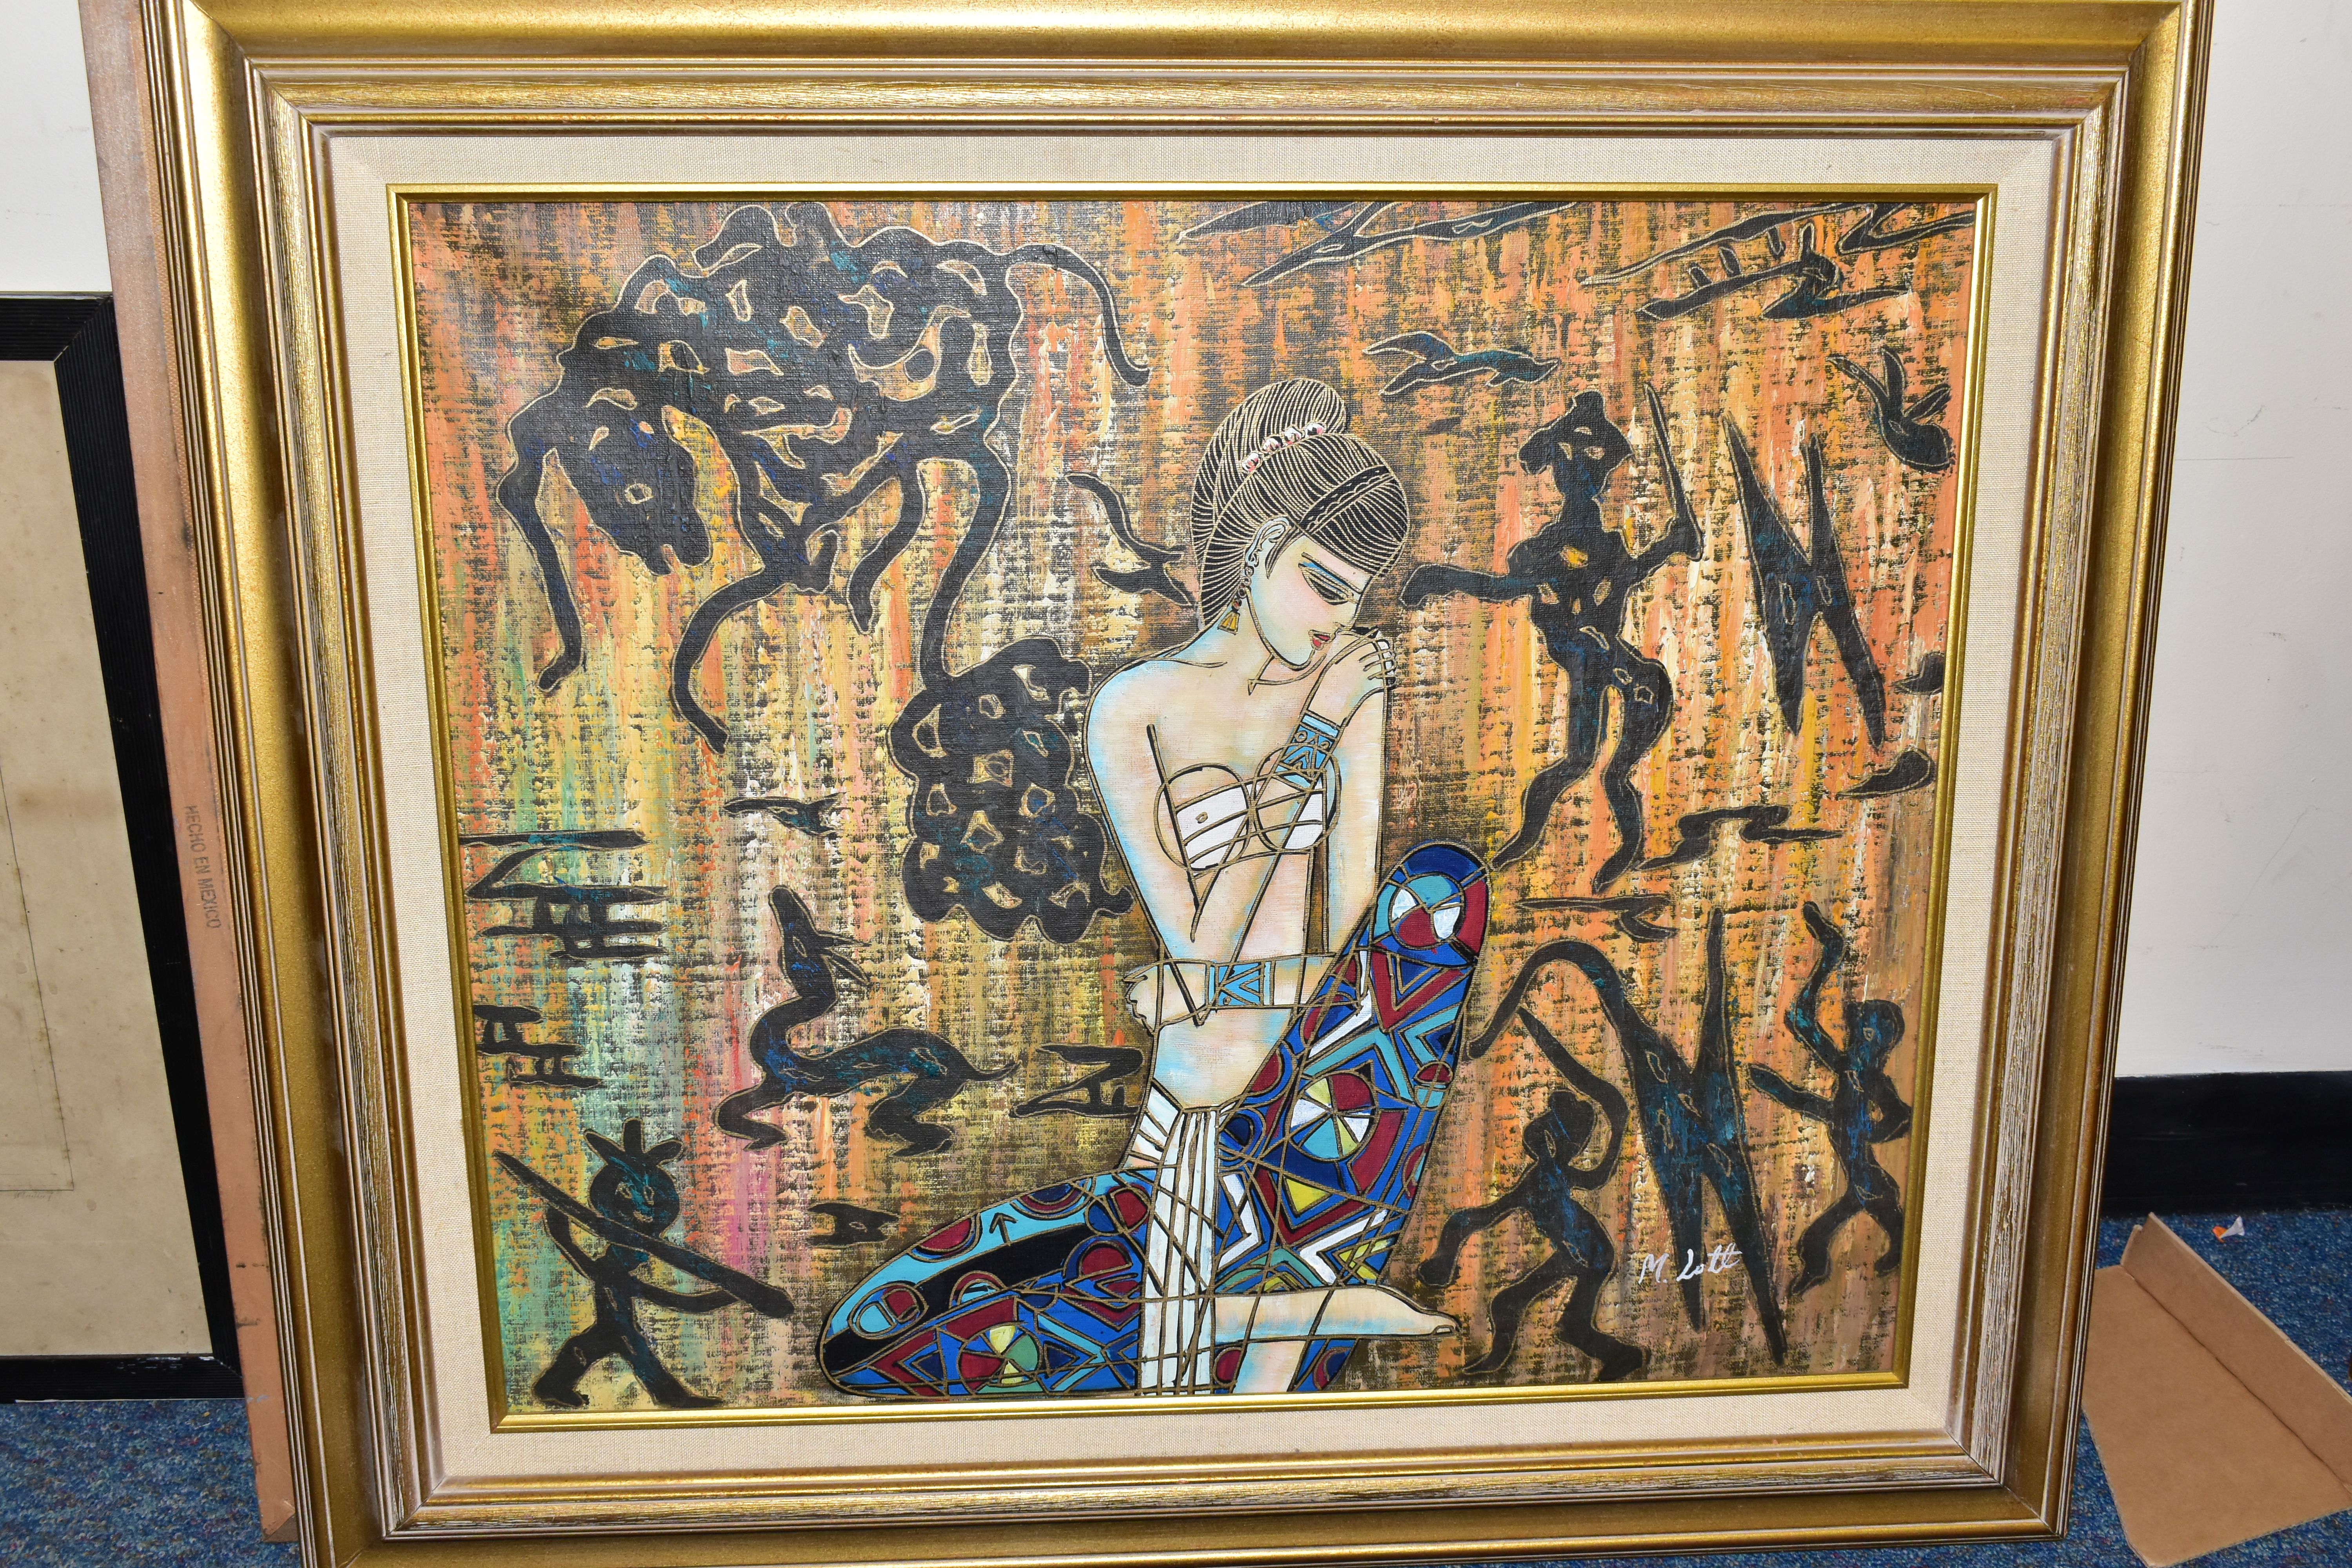 M.LOTT, (CONTEMPORARY) A STYLISED DEPICTION OF A FEMALE FIGURE SURROUNDED BY STYLISED HIEROGLYPHS, - Image 5 of 8